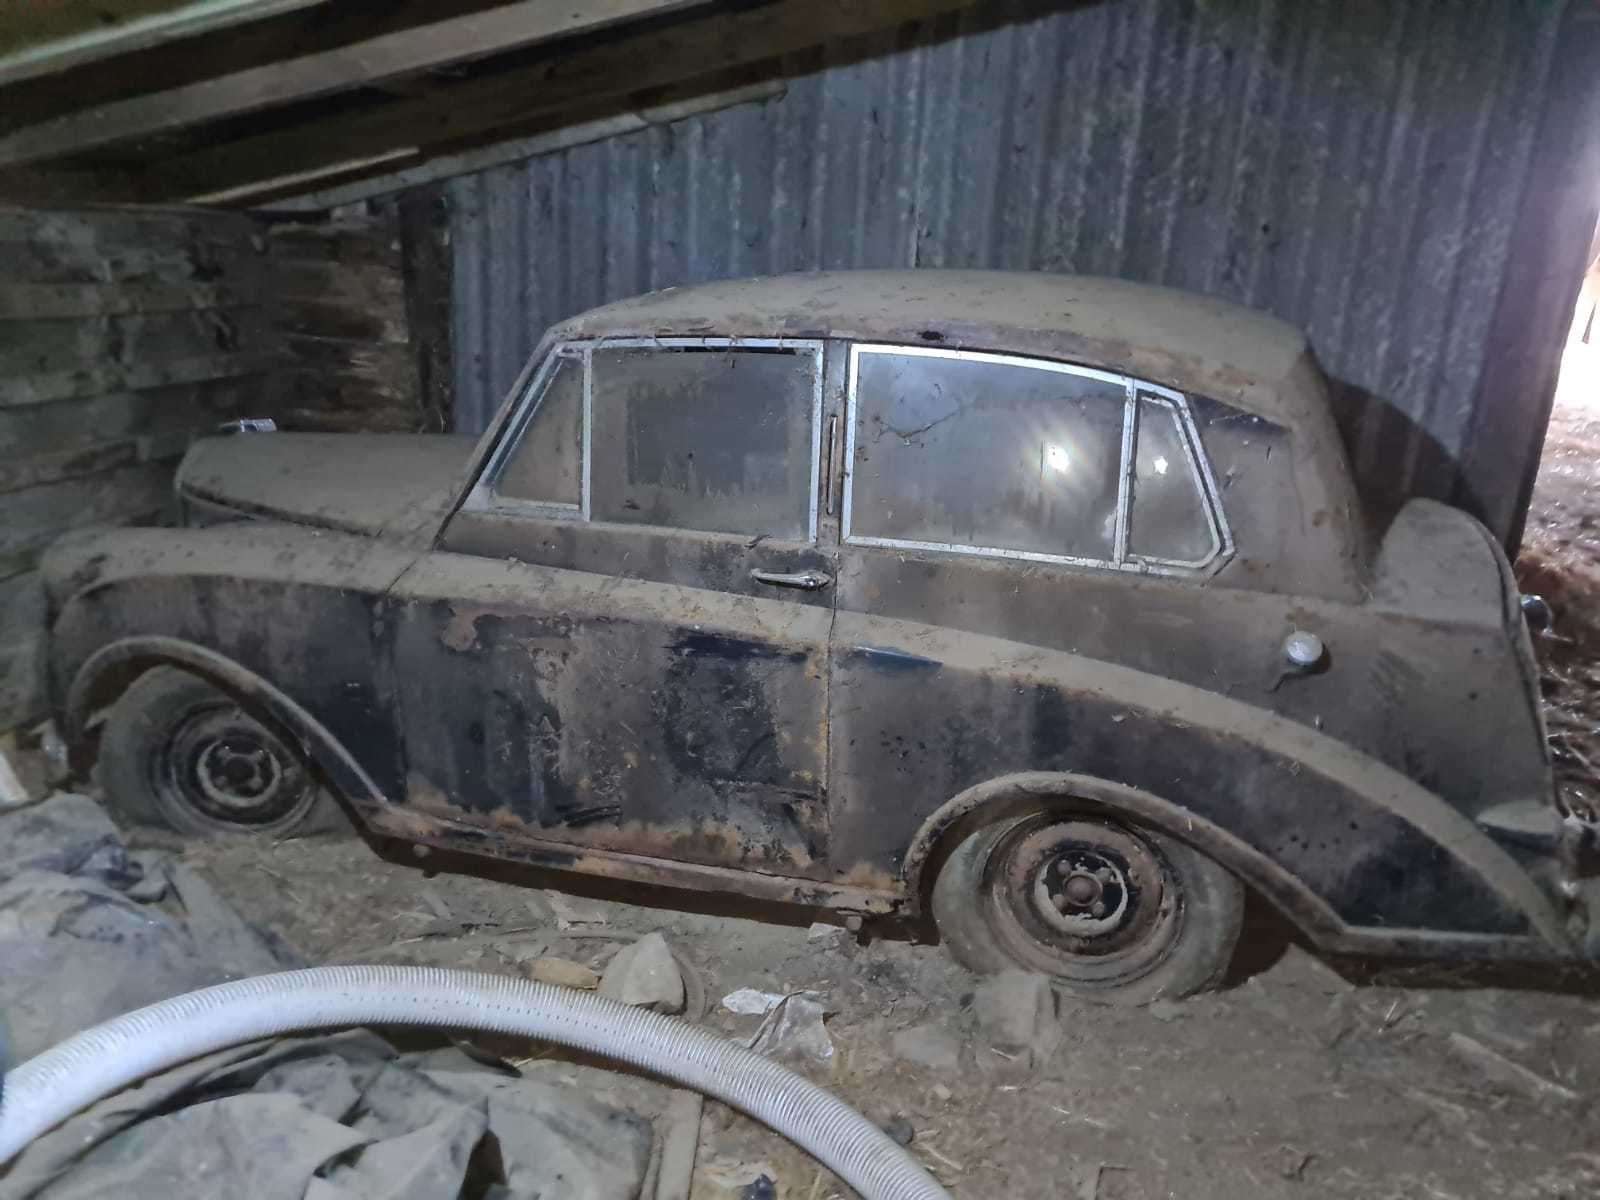 A1953 Triumph Mayflower is up for auction